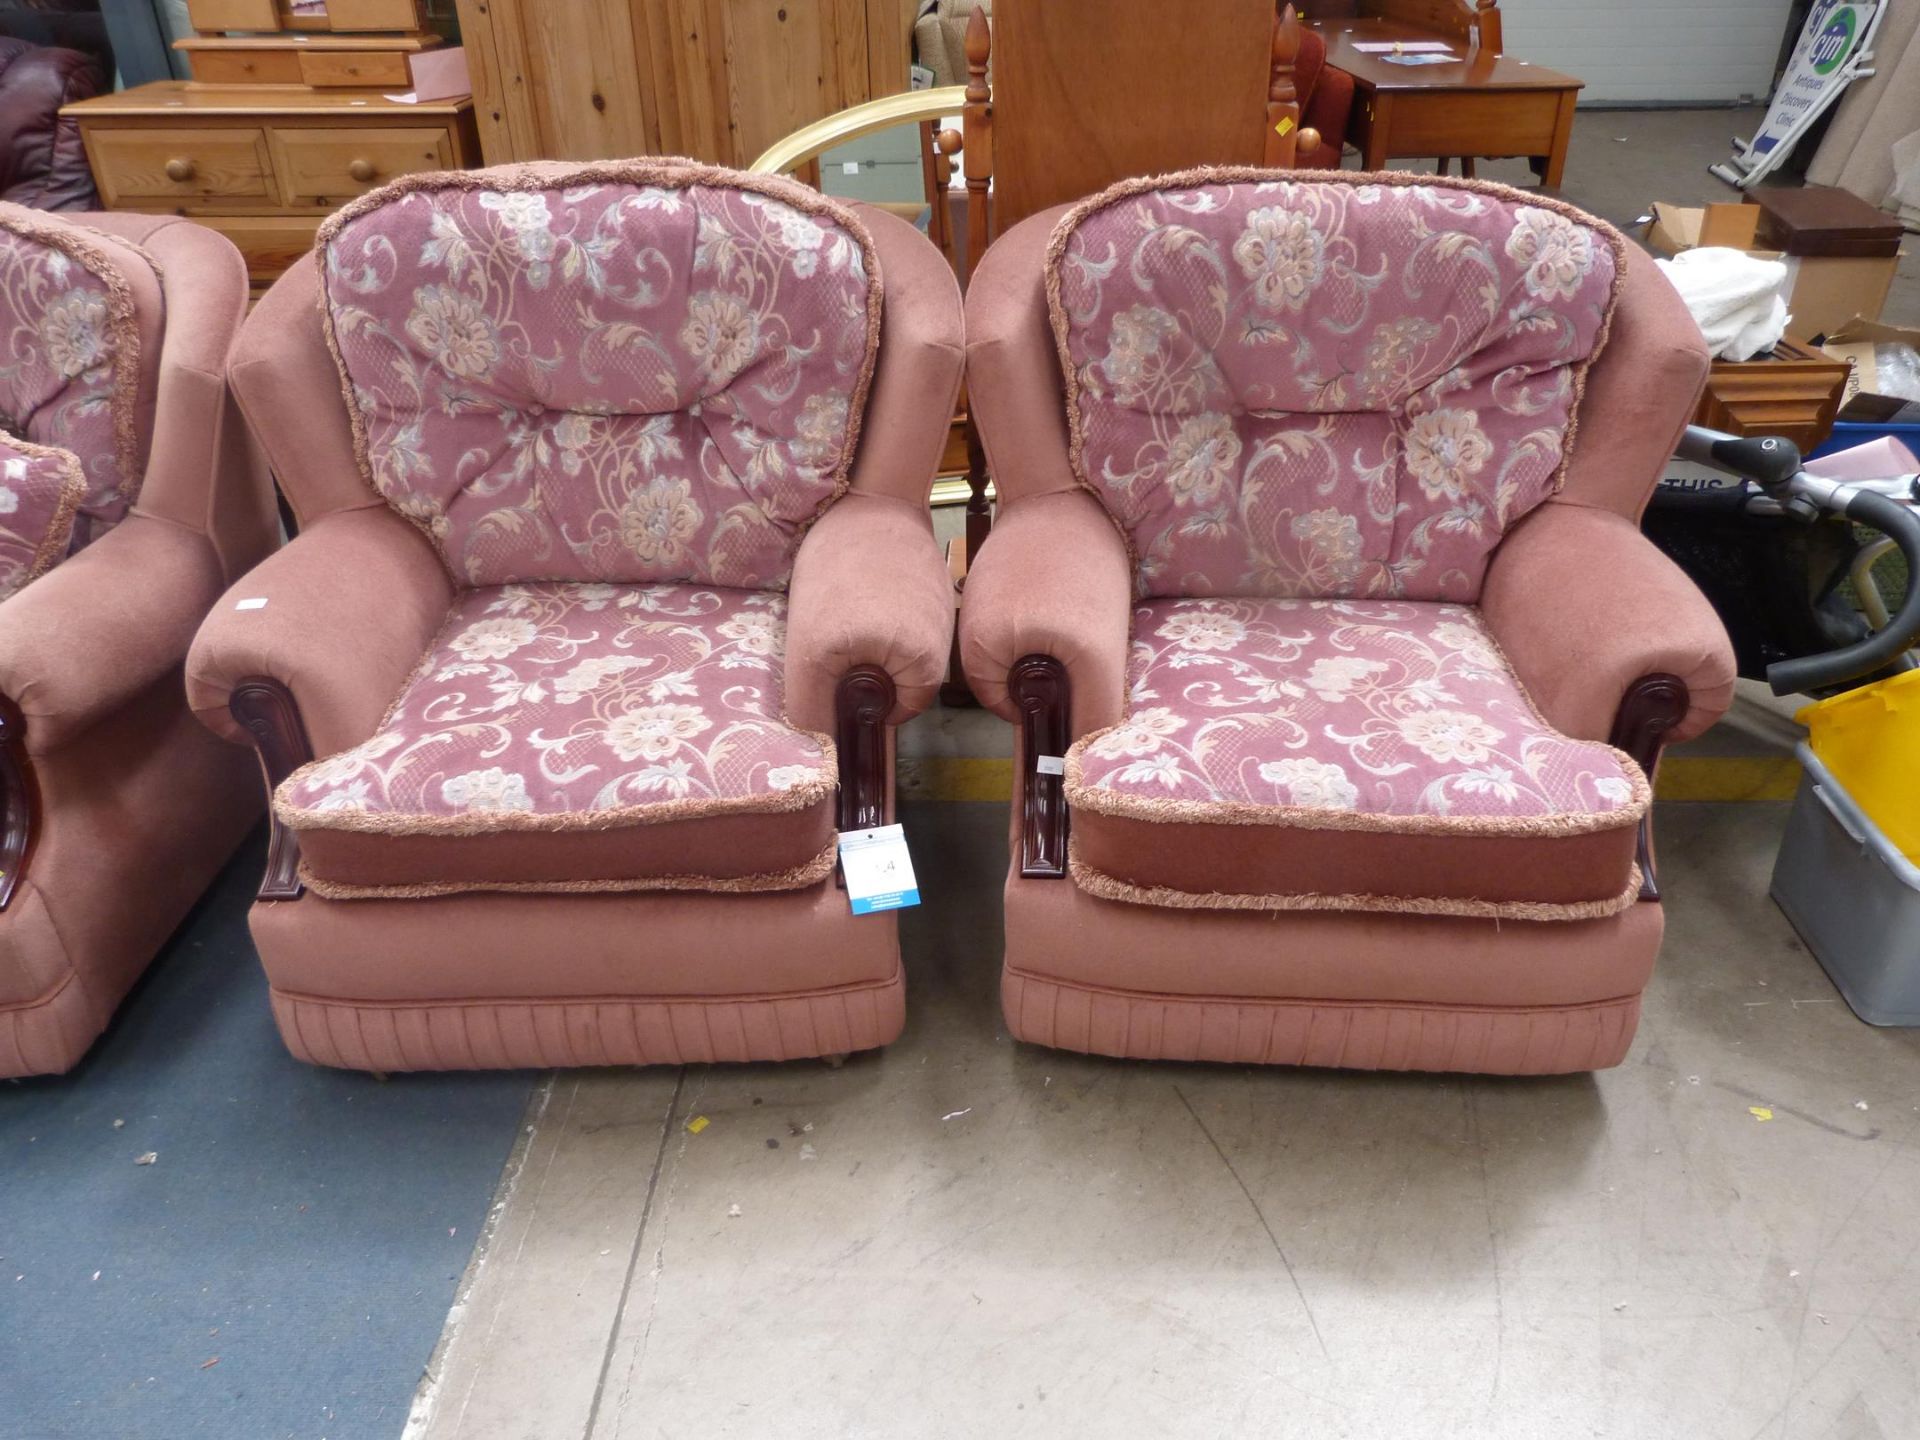 A Pink and Floral Pattern Velure Three Piece Lounge Suite (est £50-£80) - Image 2 of 3